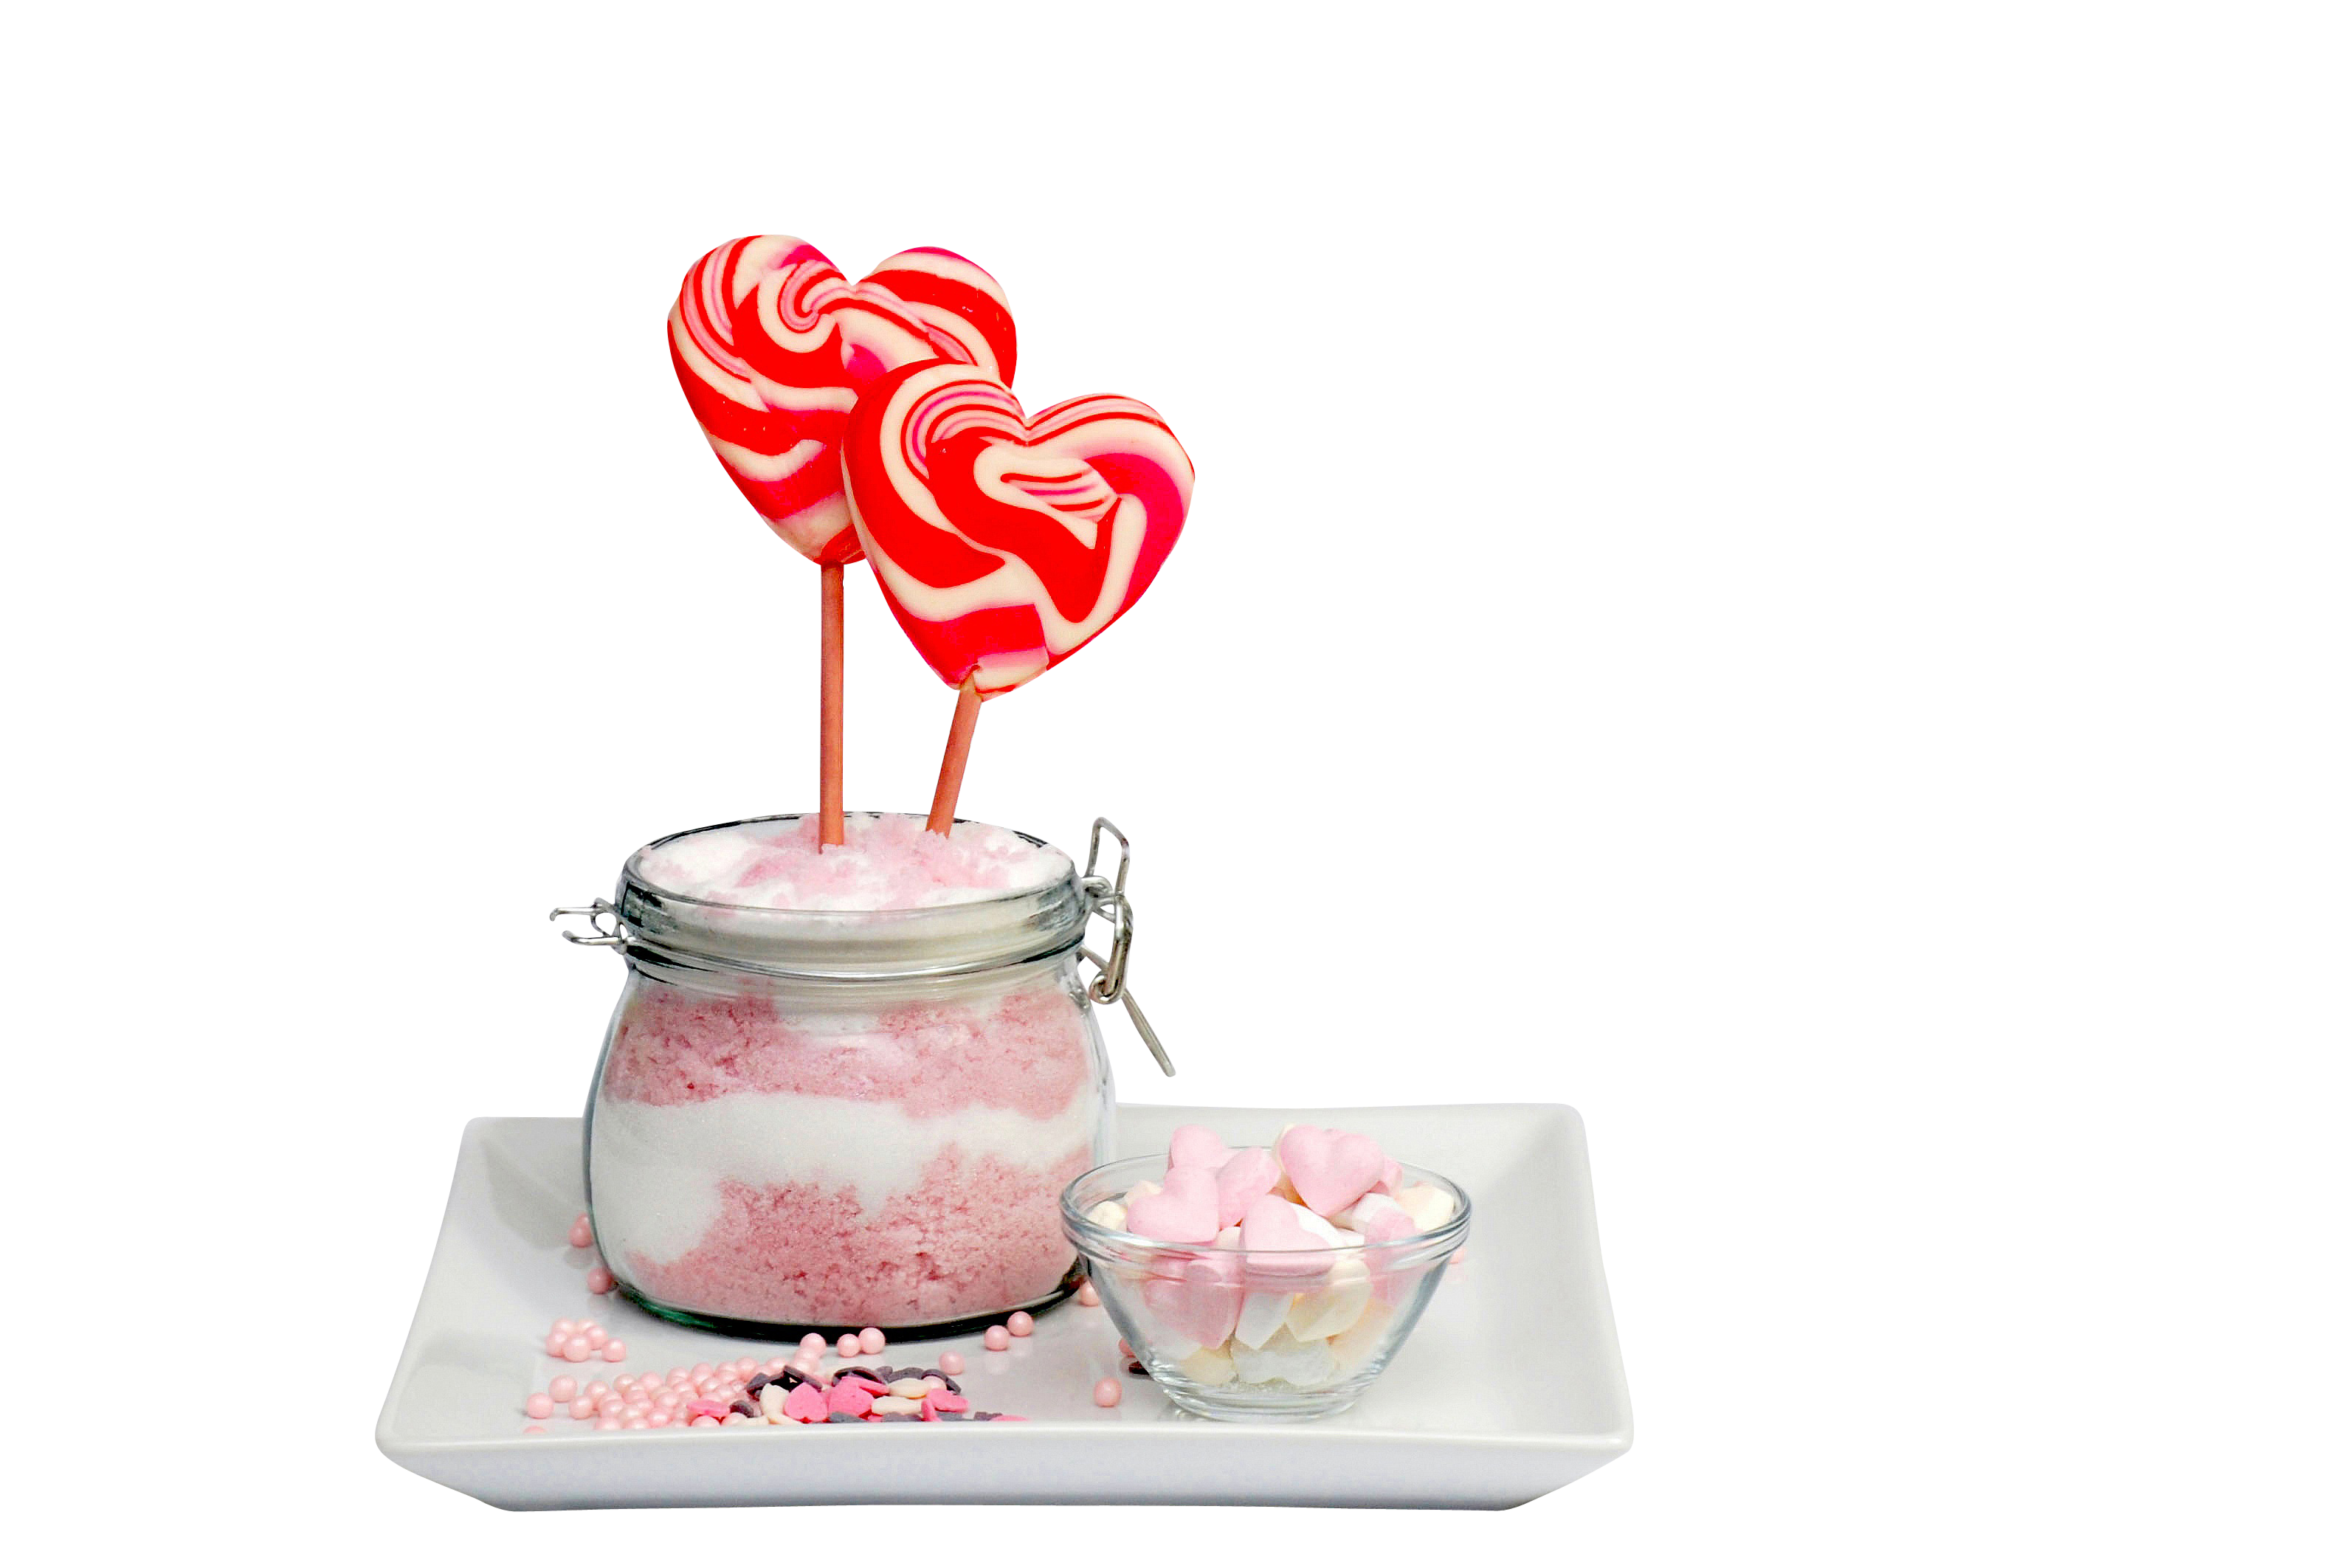 A Jar Of Pink And White Dessert With Two Lollipops On Sticks